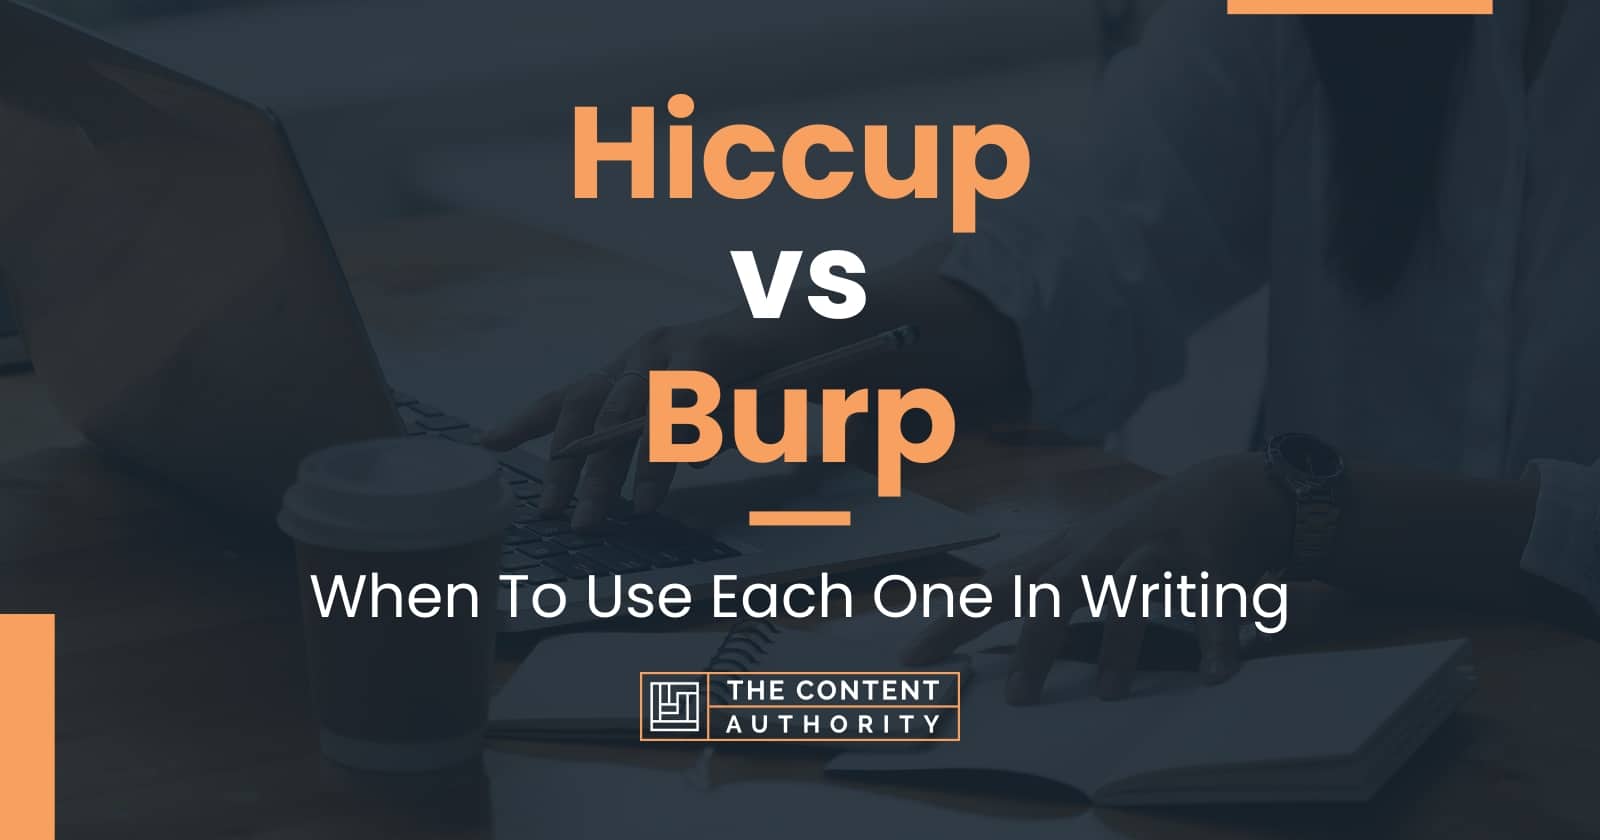 brandon bovell recommends Hiccups And Burps Together